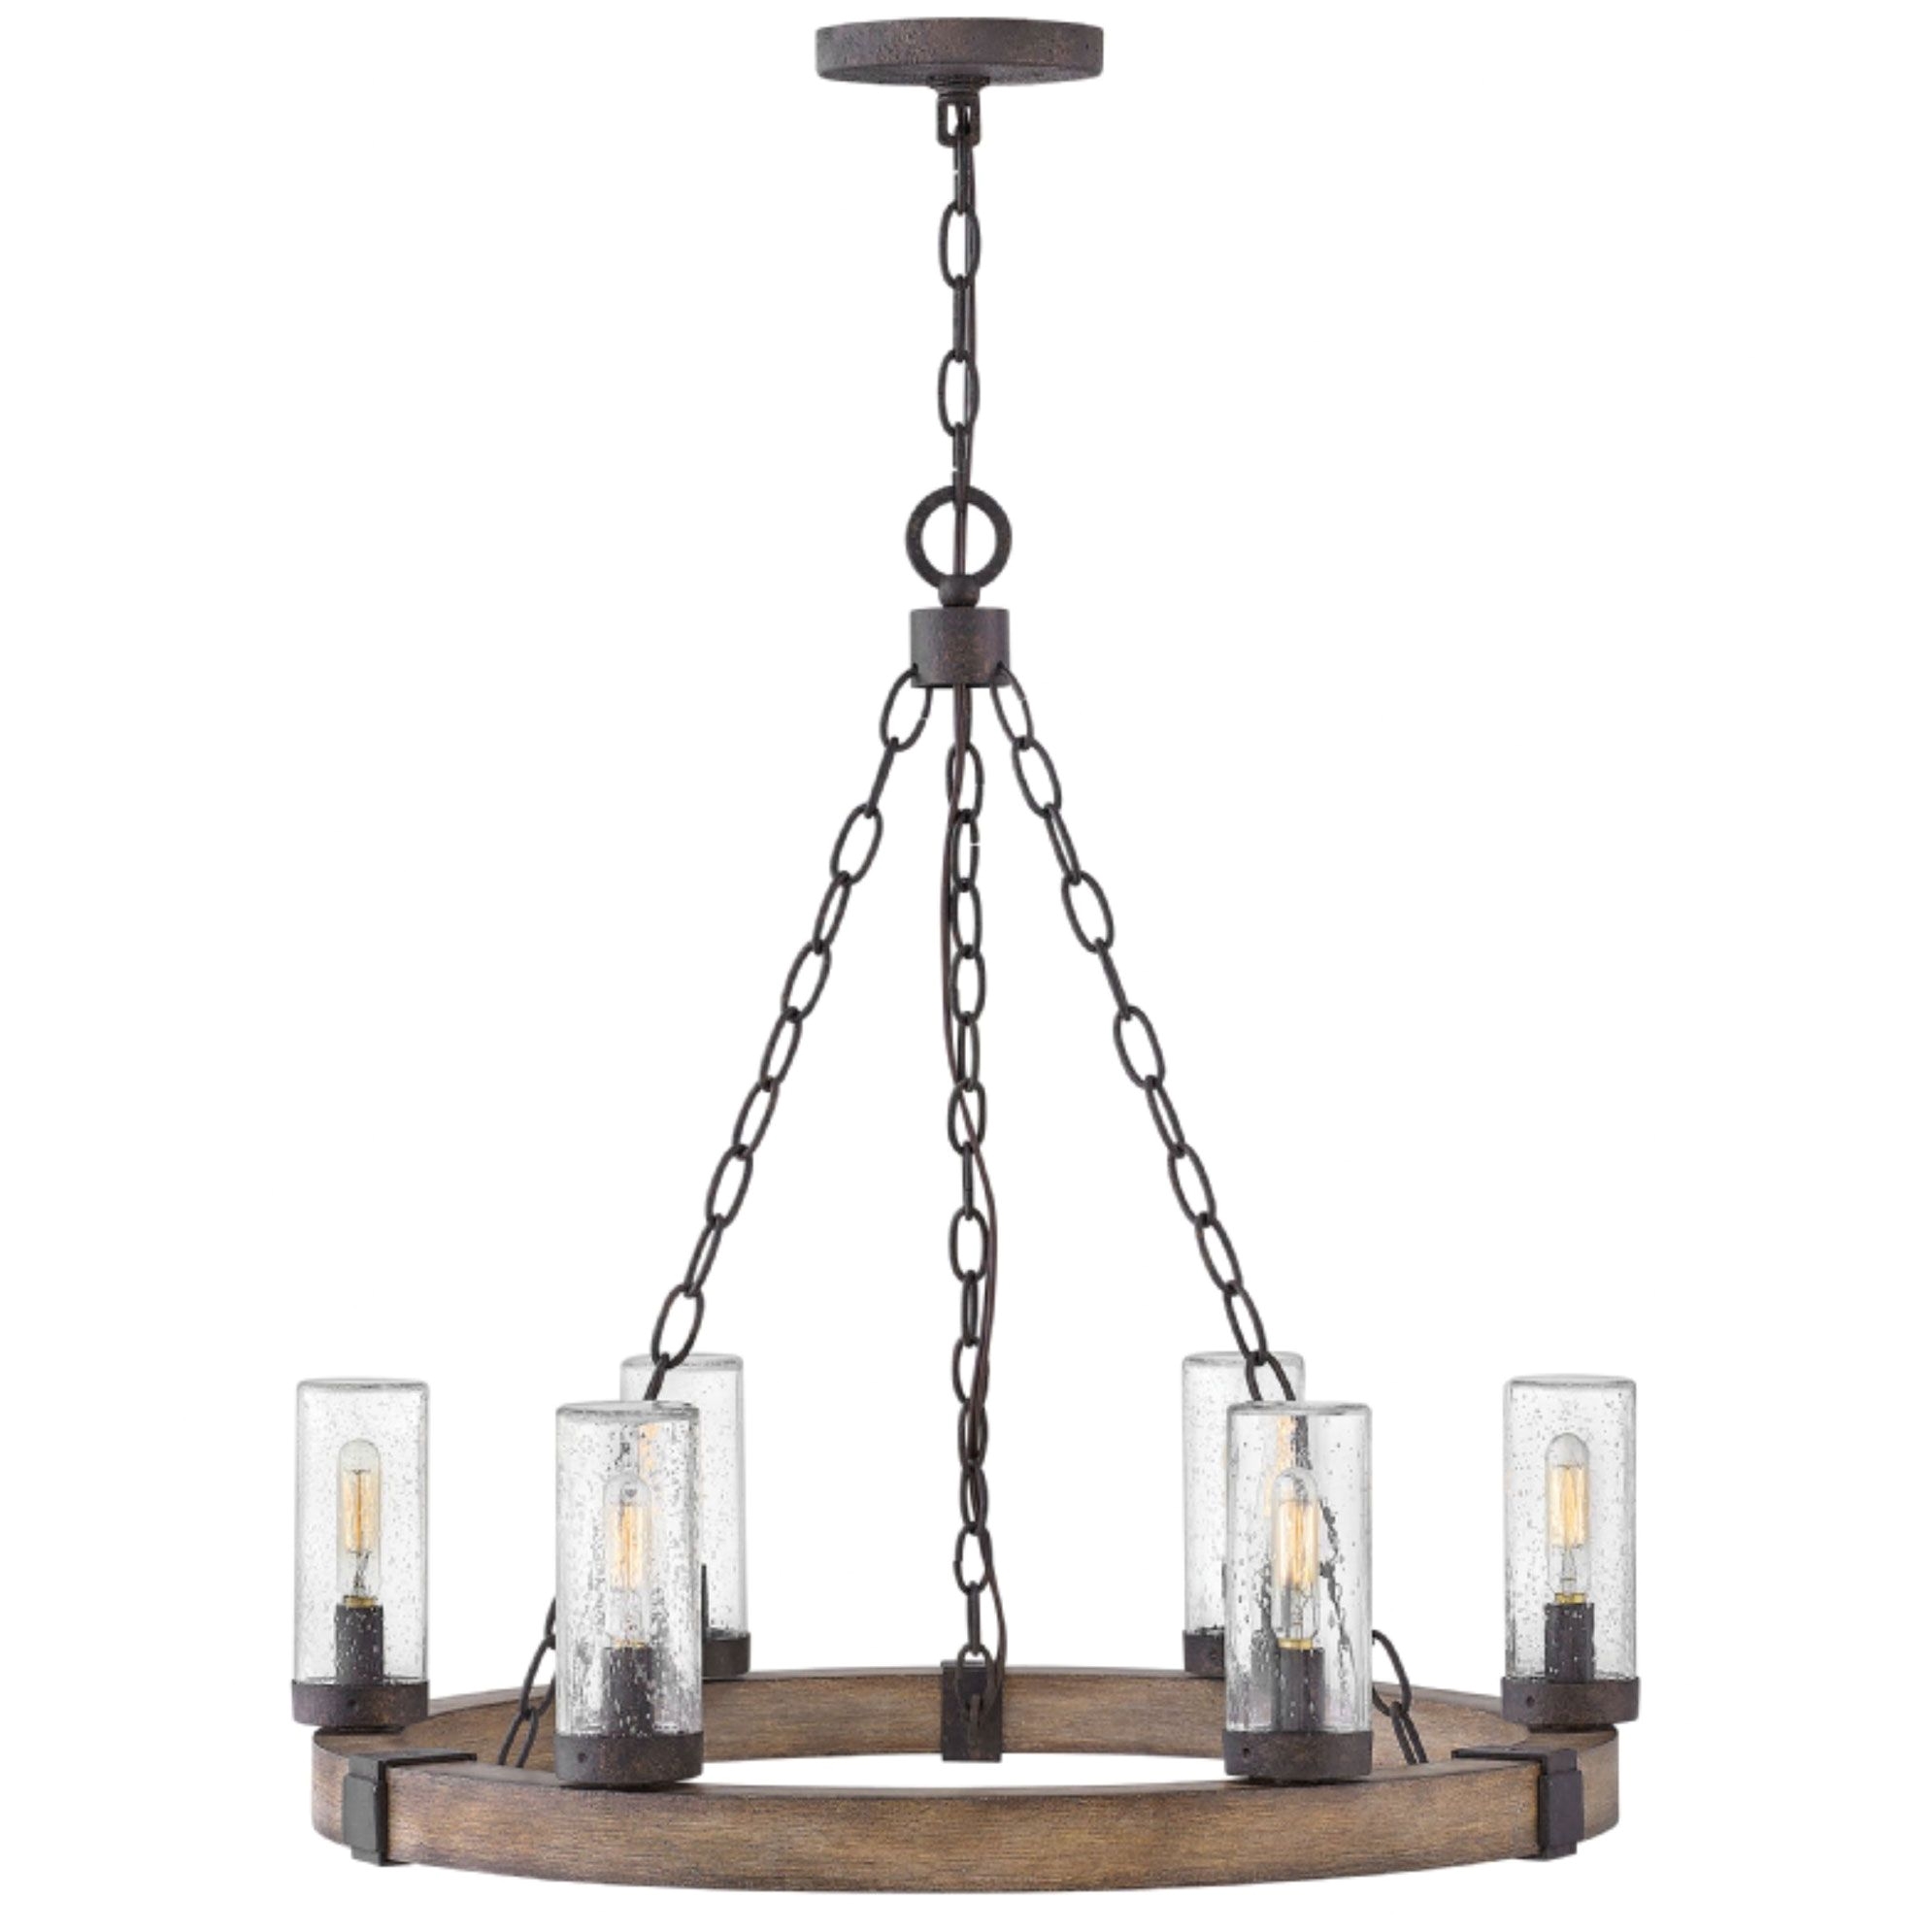 hinkley lighting carries many sequoia sawyer exterior ceiling mount light fixtures that can be used to enhance the appearance and lighting of any home